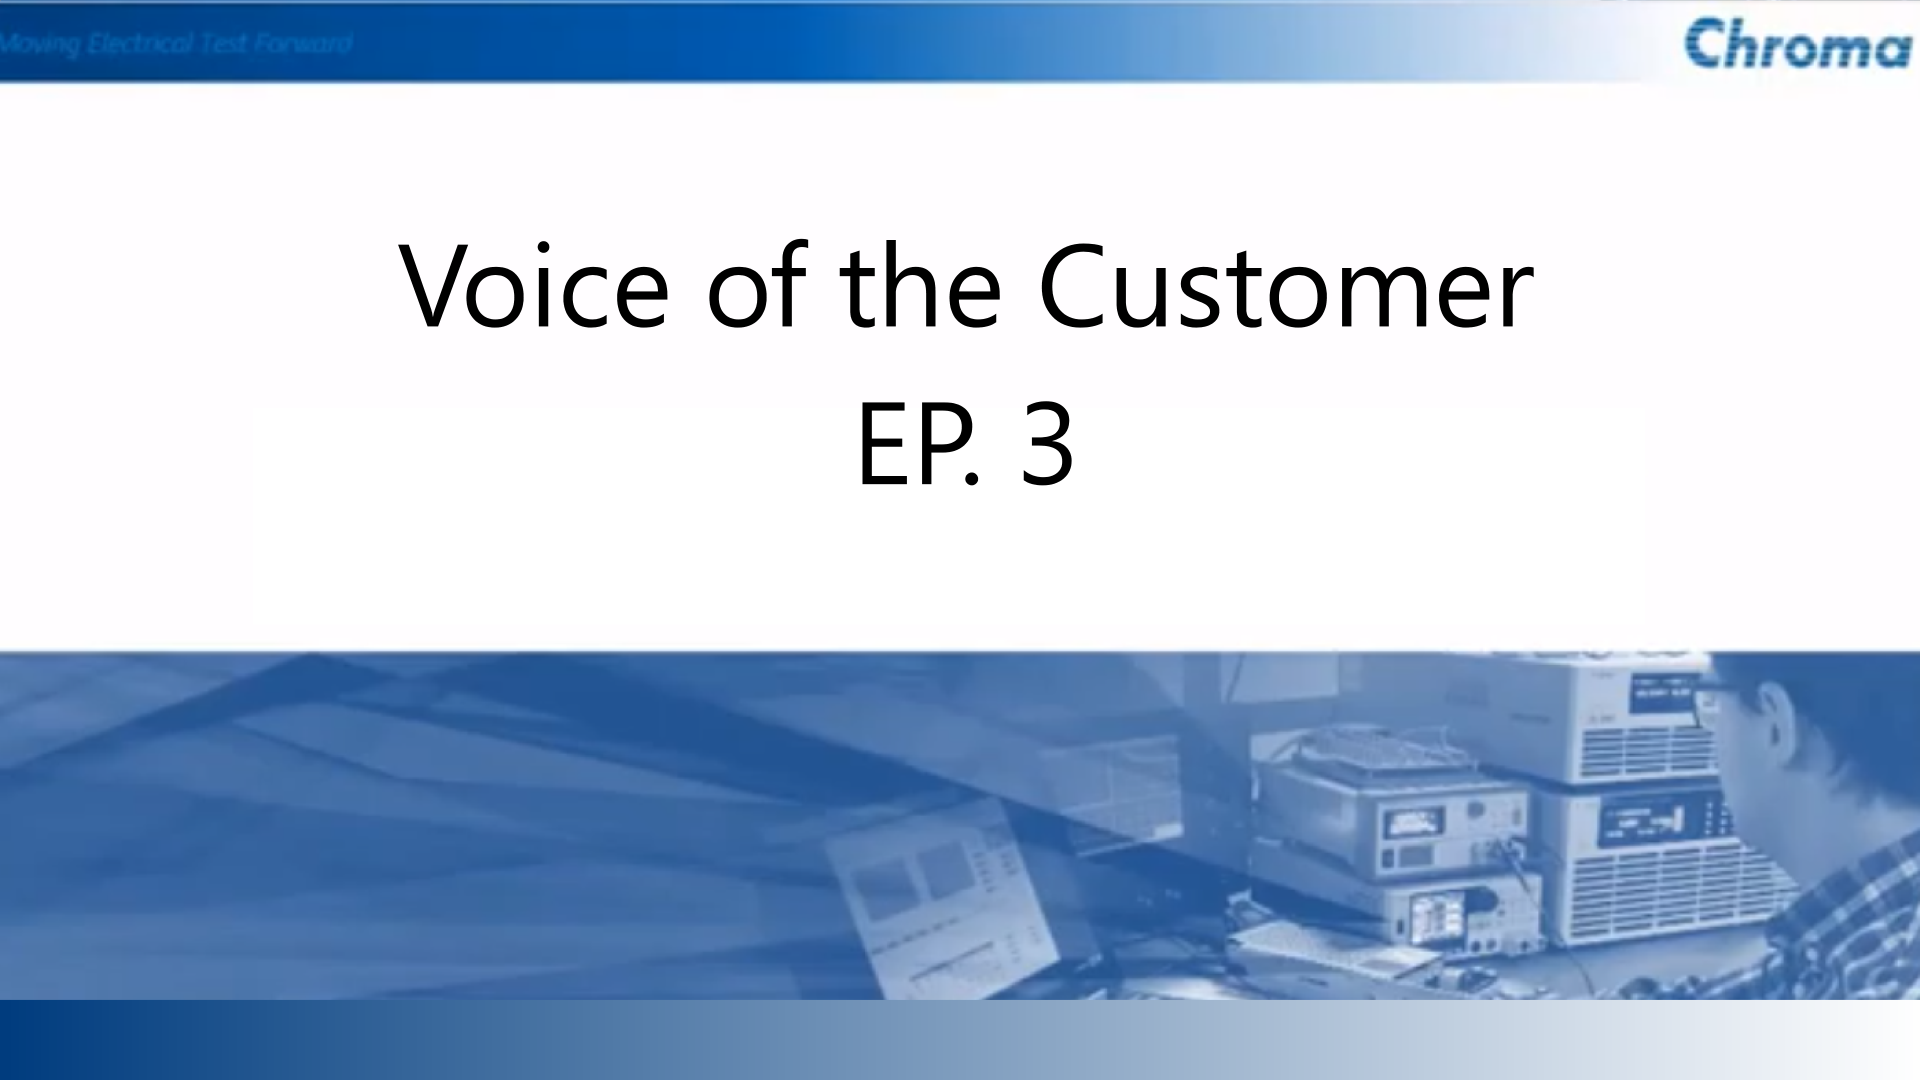 Voice of the Customer EP 3